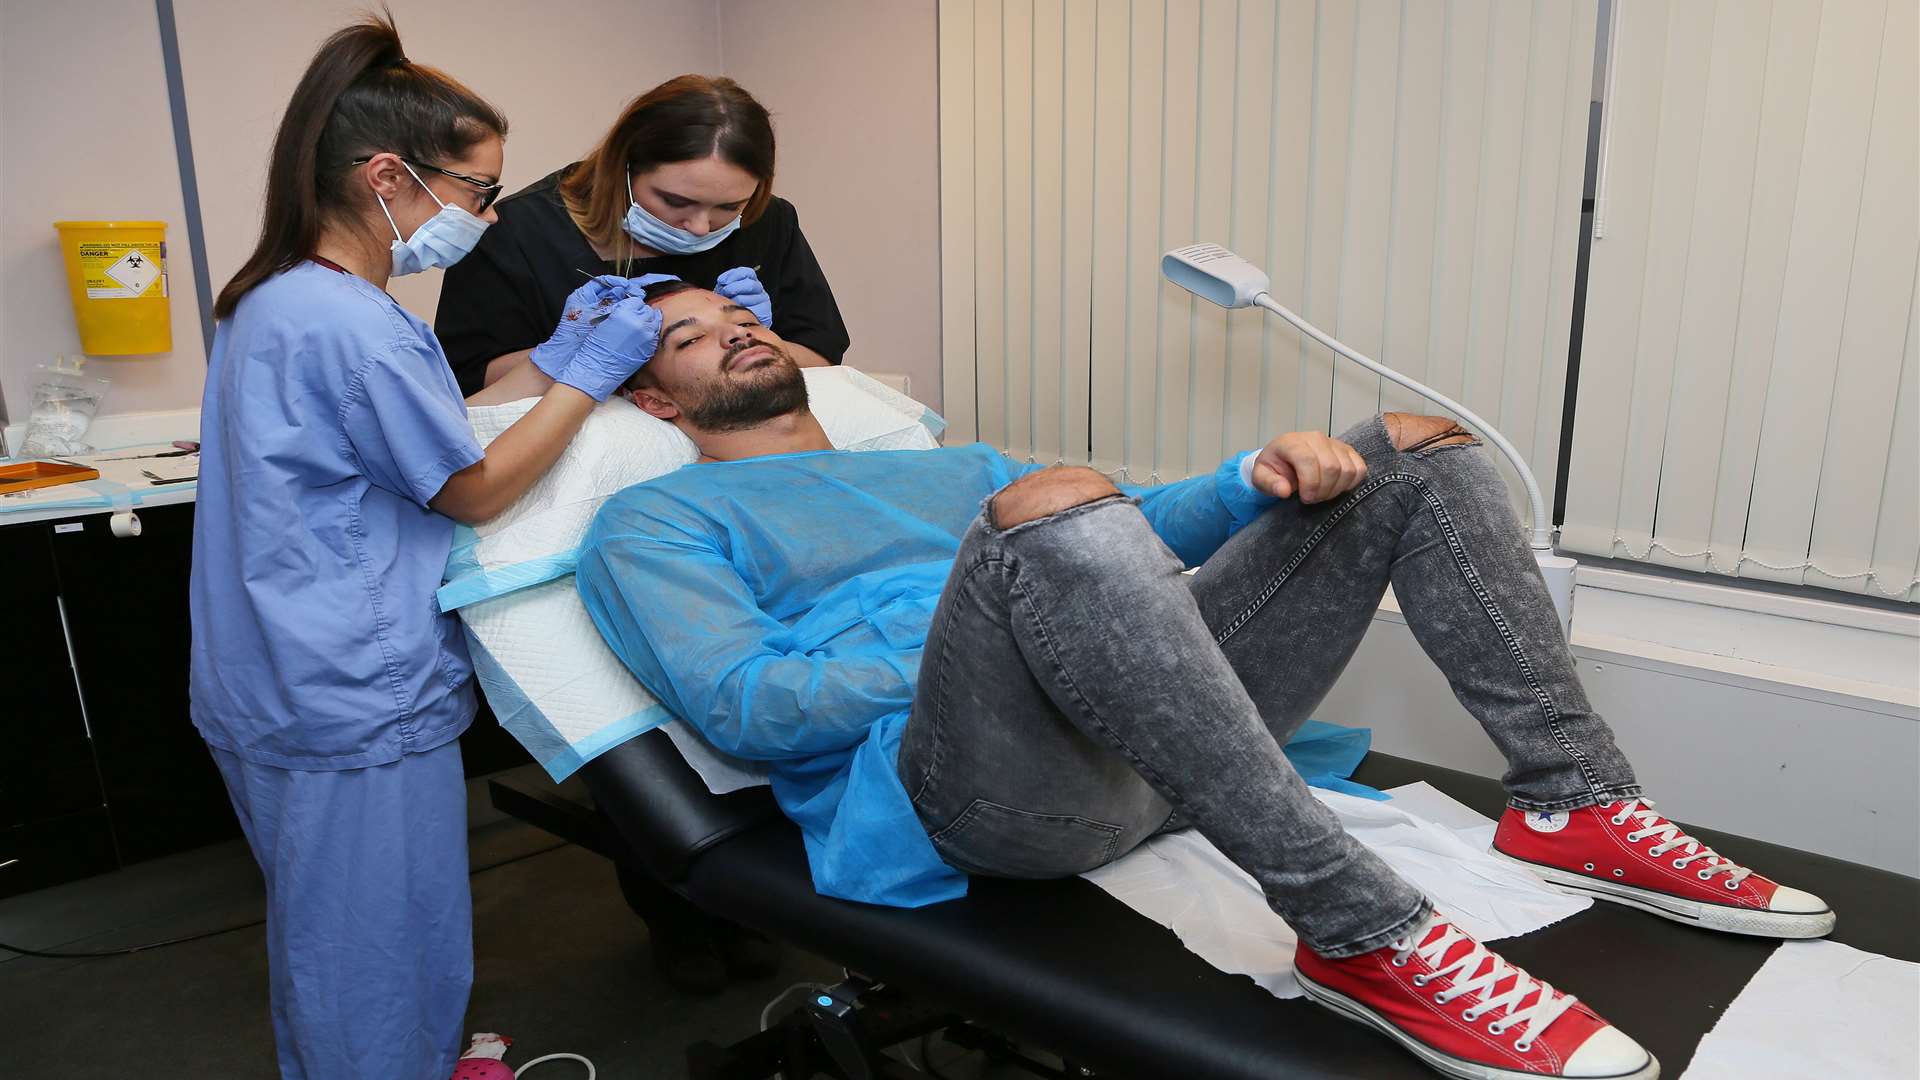 Michael Hassini from TOWIE visited the KSL clinic in Maidstone to undergo a hair transplant